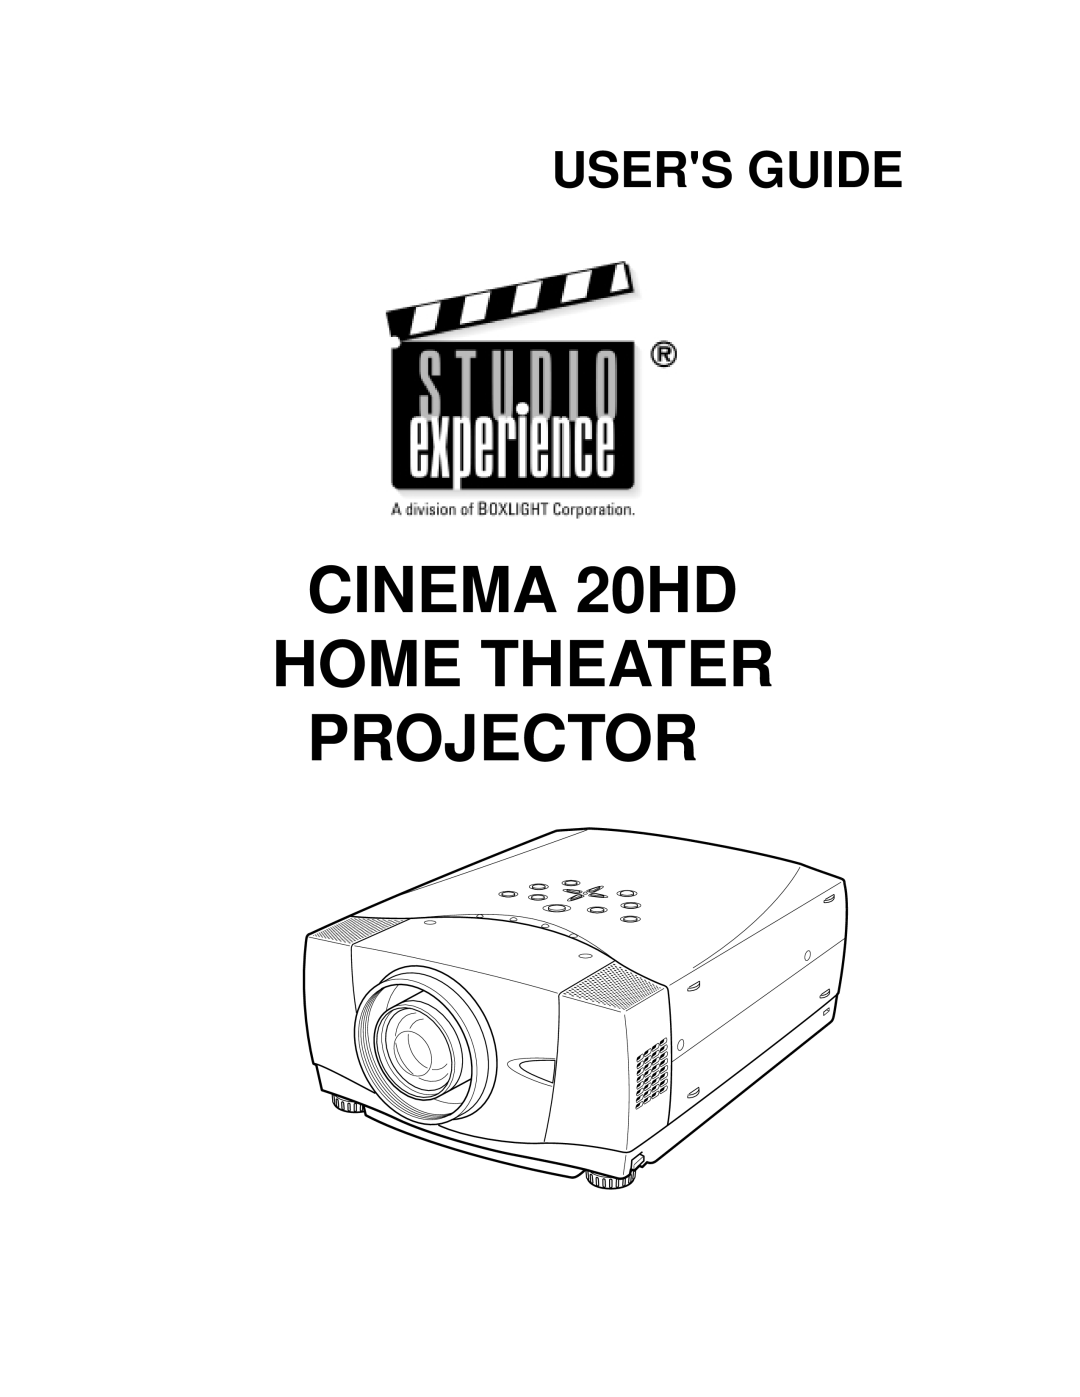 BOXLIGHT CINEMA 20HD manual Home Theater Projector, Users Guide 